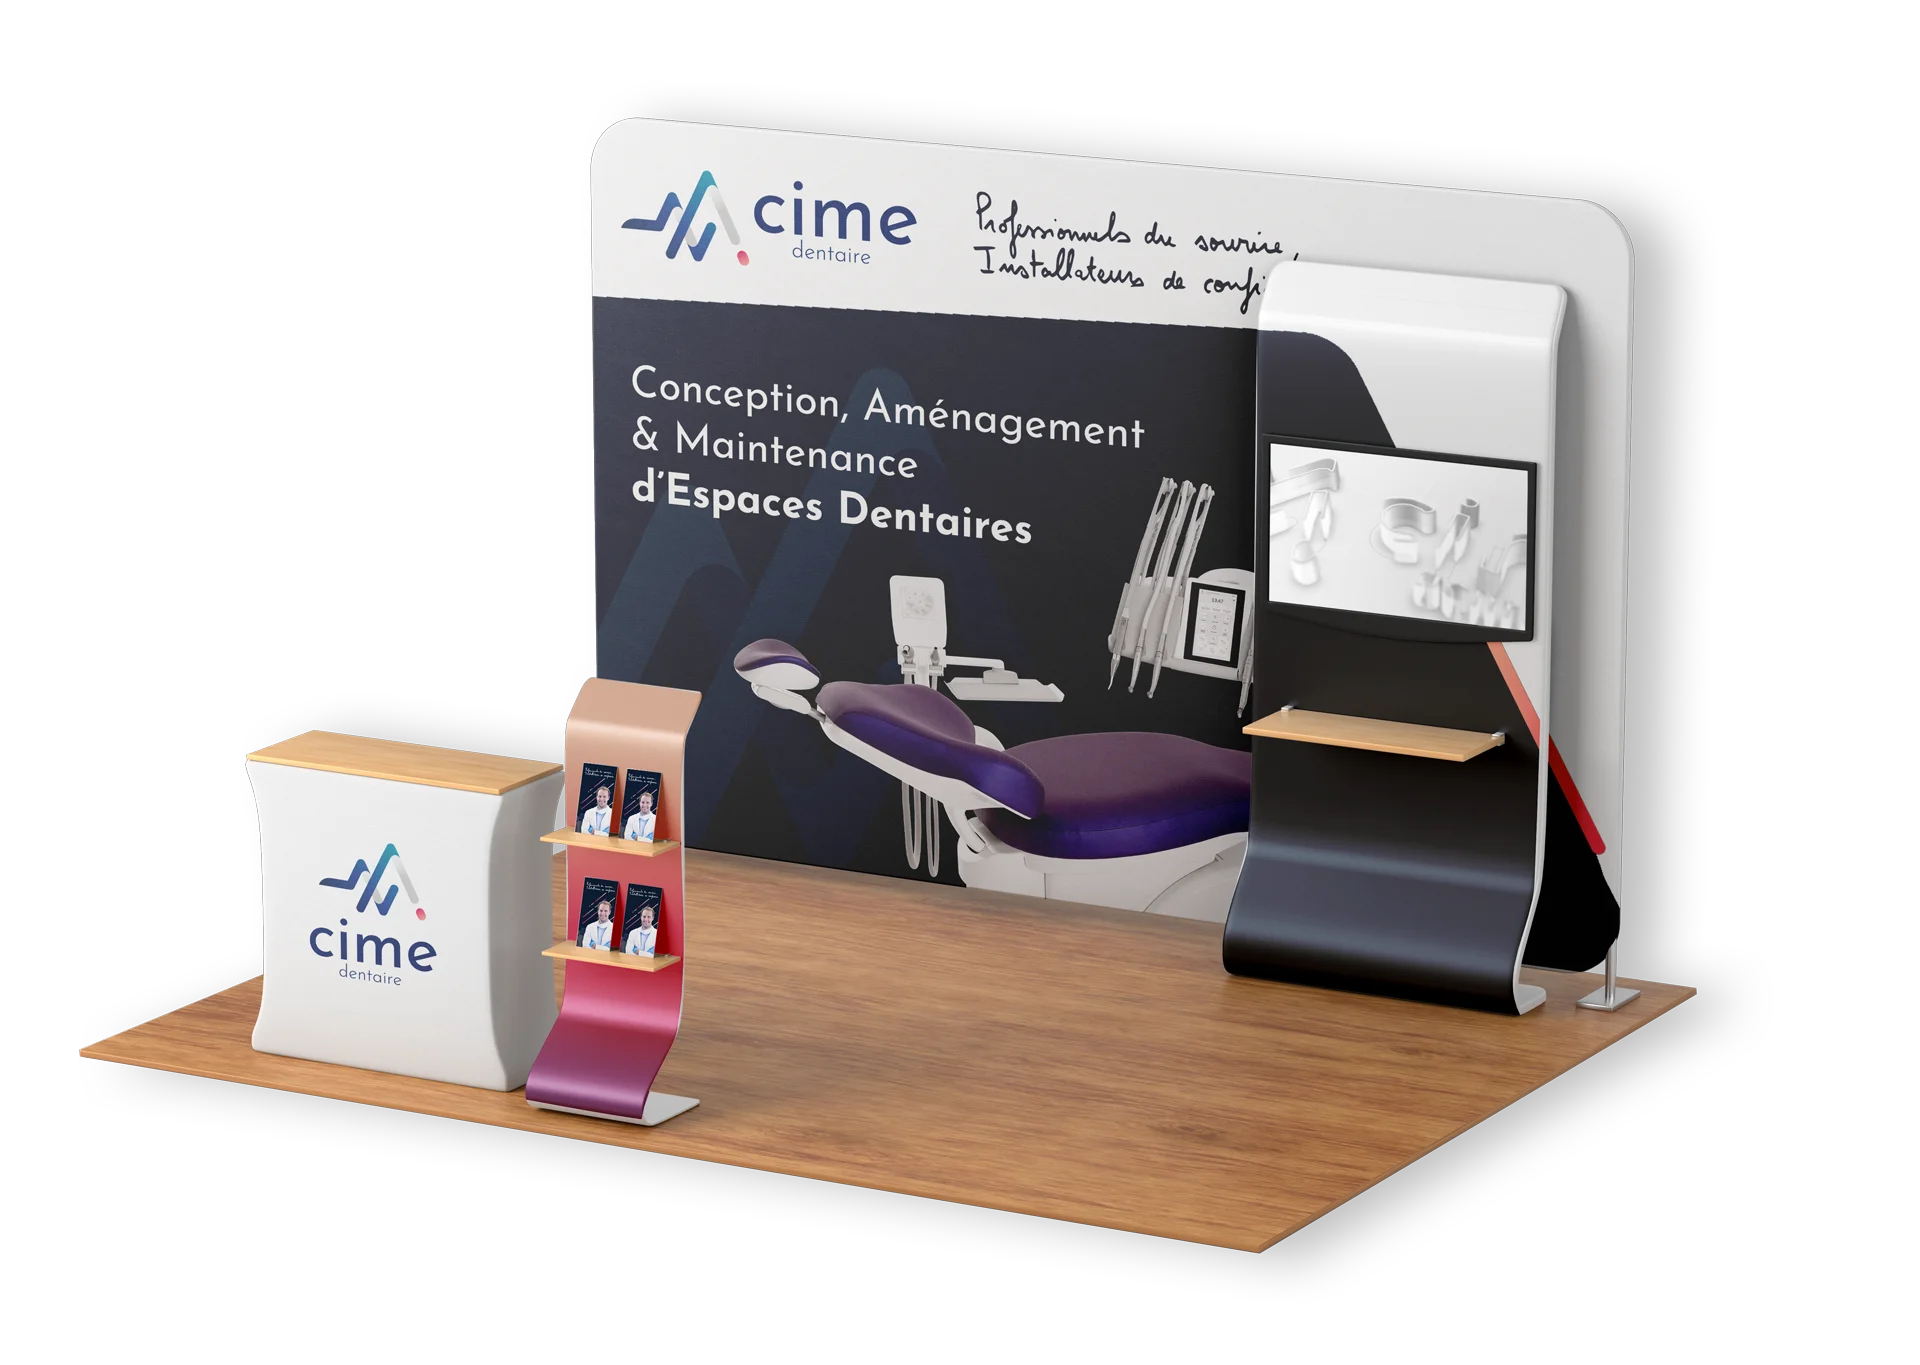 stand mockup cimedentaire